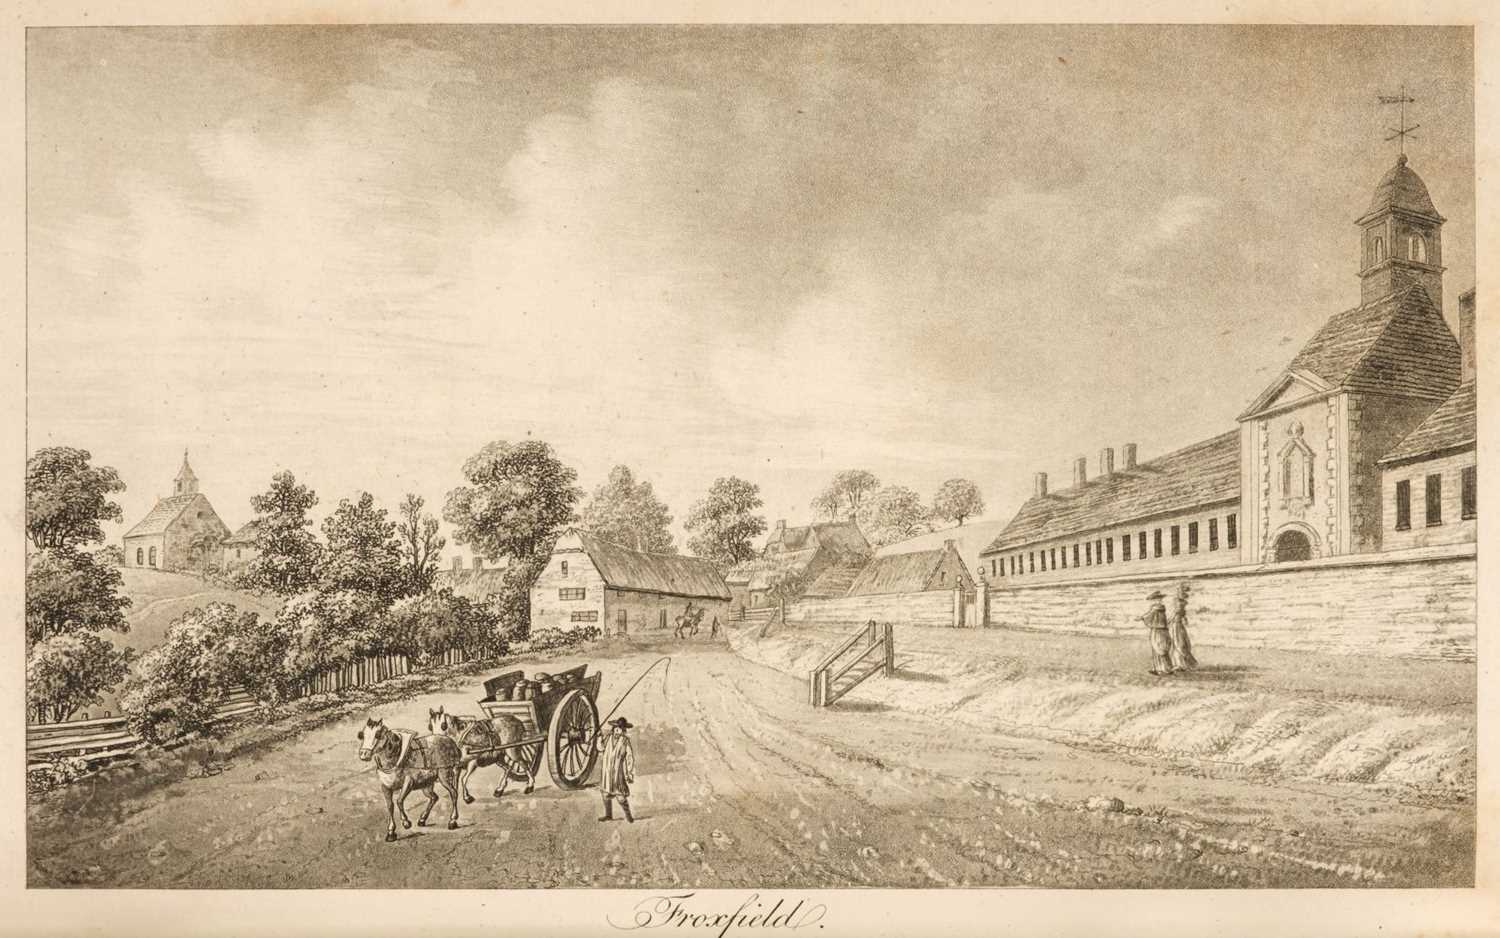 Lot 145 - Robertson (Archibald). Topographical Survey of the Great Road from London to Bath and Bristol, 1792